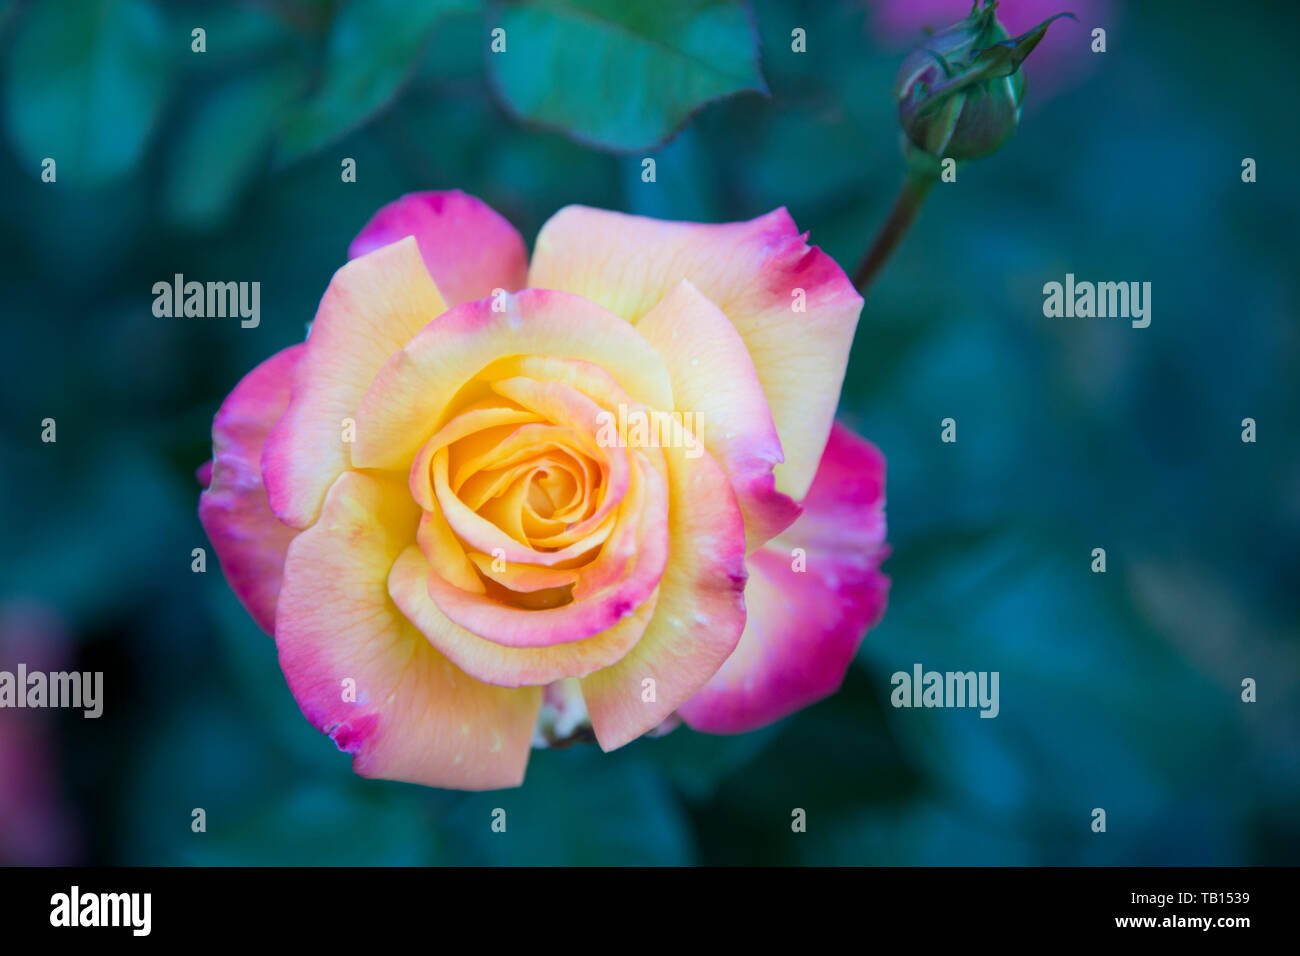 Closeup of yellow and pnk rose on bush, with other roses out of focus in background. Stock Photo